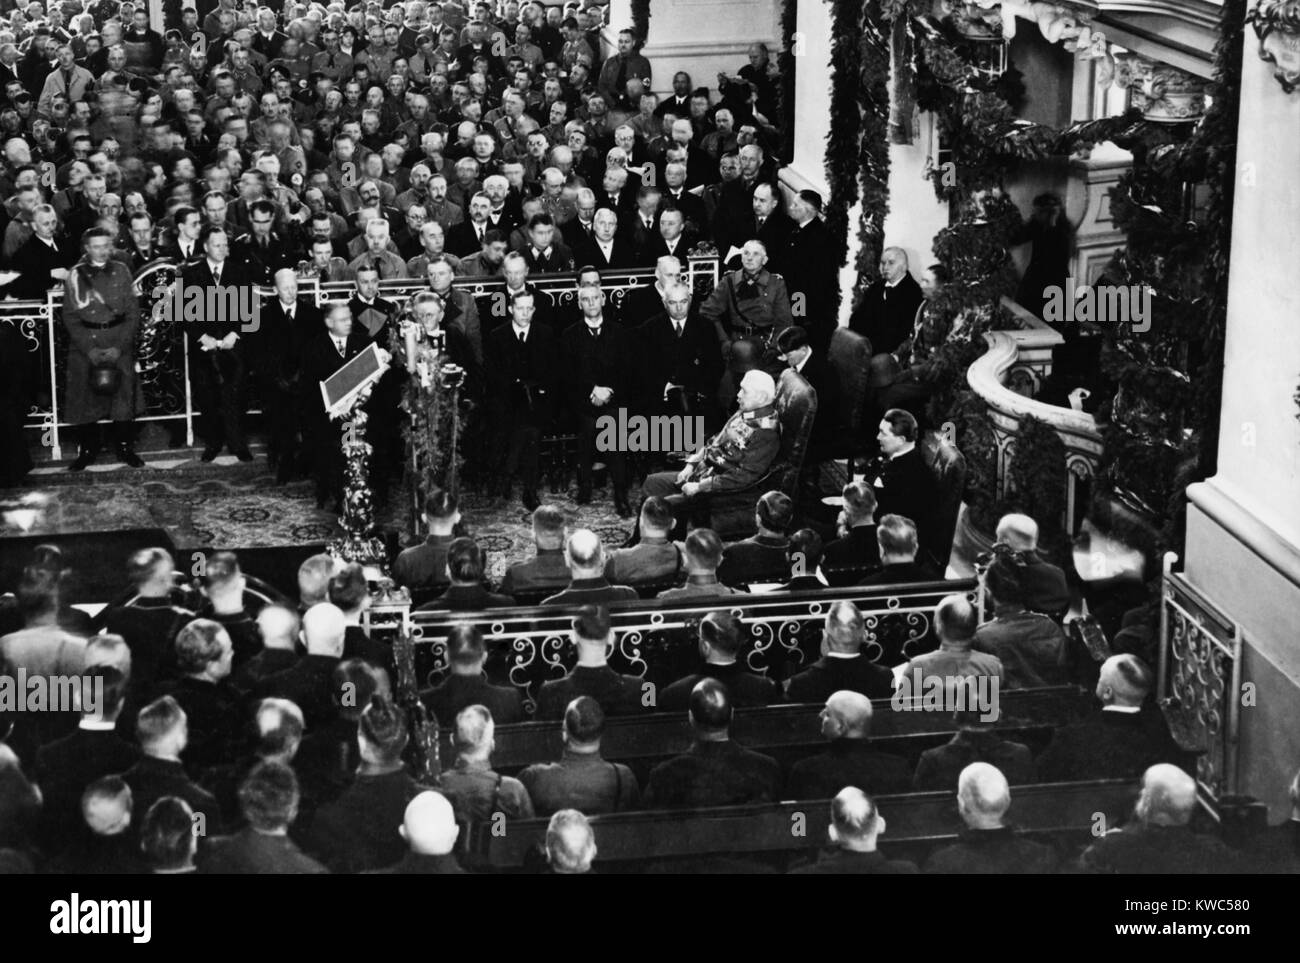 Paul von Hindenburg, Adolf Hitler, and Hermann Goering (center right), March 21, 1933. They were in the Garrison Church in Potsdam for ceremonies opening the Reichstag session. Hitler was named Chancellor of Germany on Jan. 30, 1933. (BSLOC 2015 14 12) Stock Photo